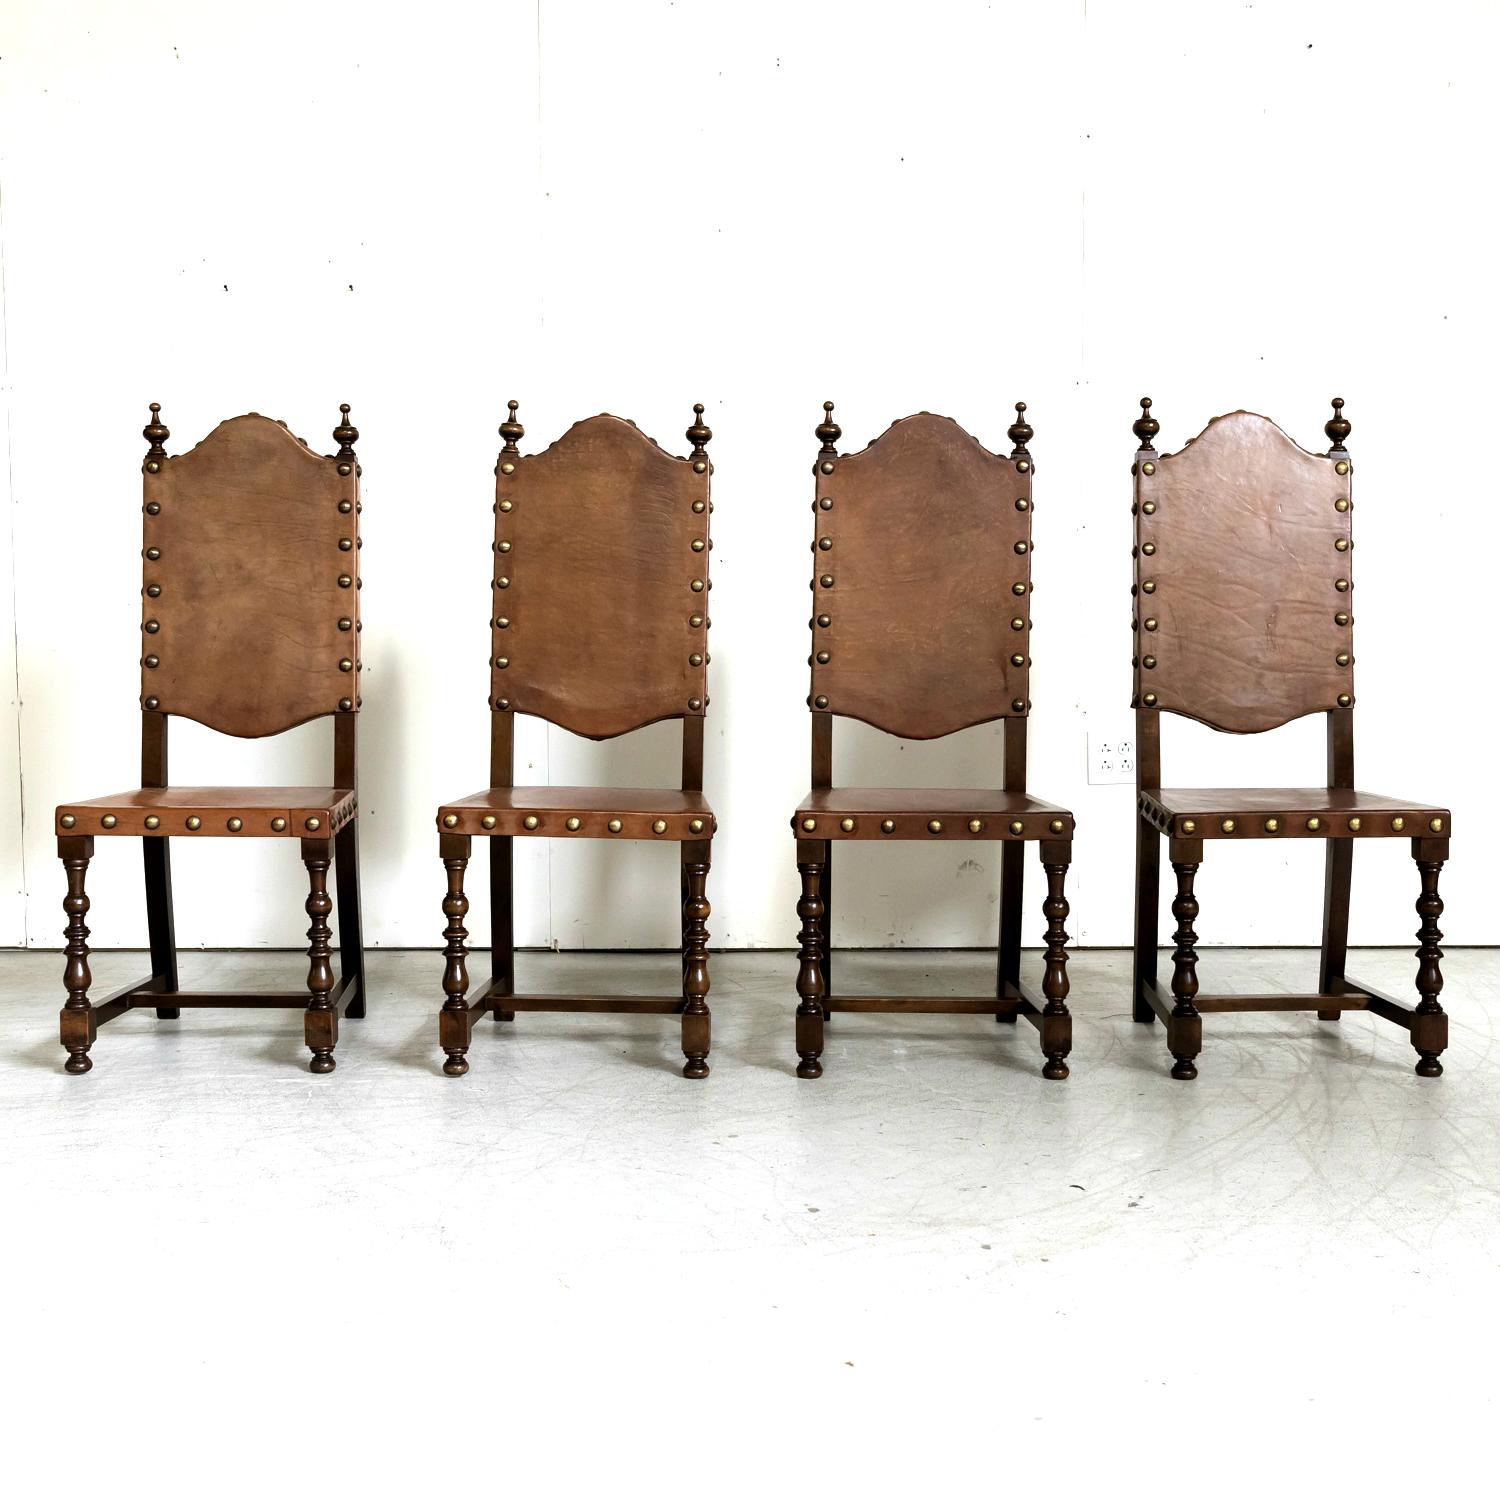 A handsome set of four 19th century Spanish Baroque style leather and walnut side dining chairs, circa 1890s. Original cordovan leather backs and seats with wood finials and large brass nailhead trim. Supported by two front turned legs and straight